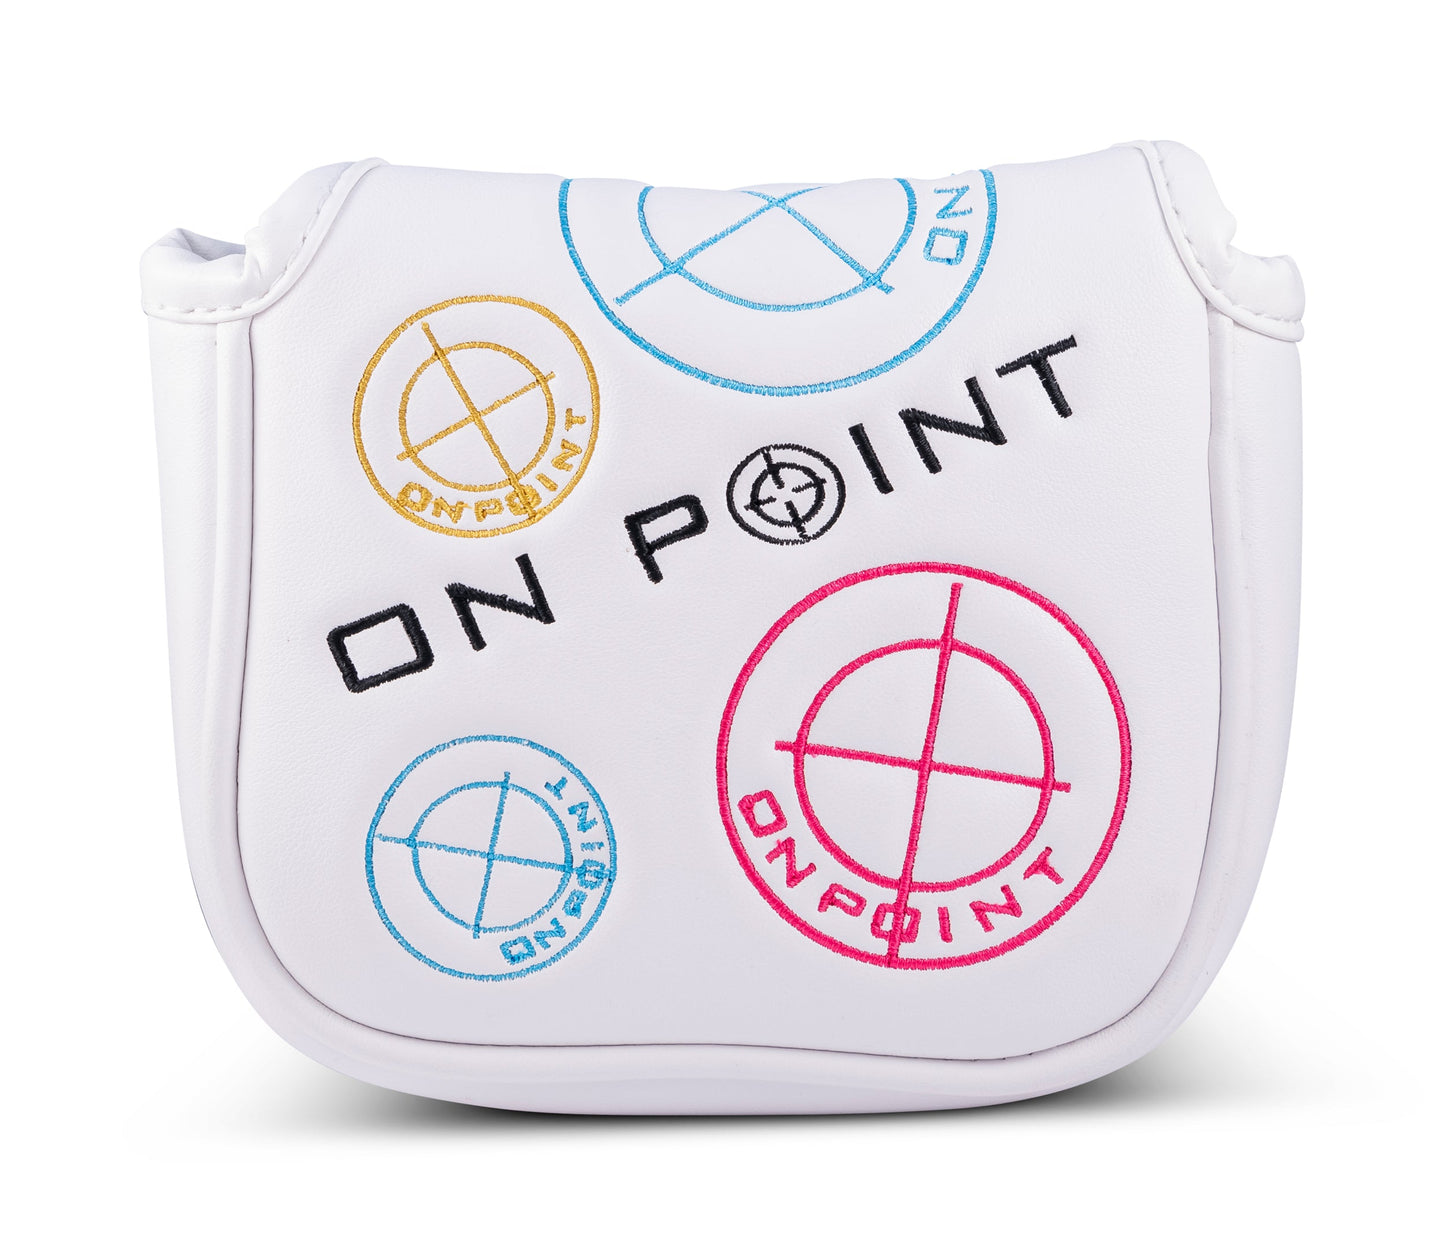 ON POINT PUTTER COVERS by OnPointGolf.us